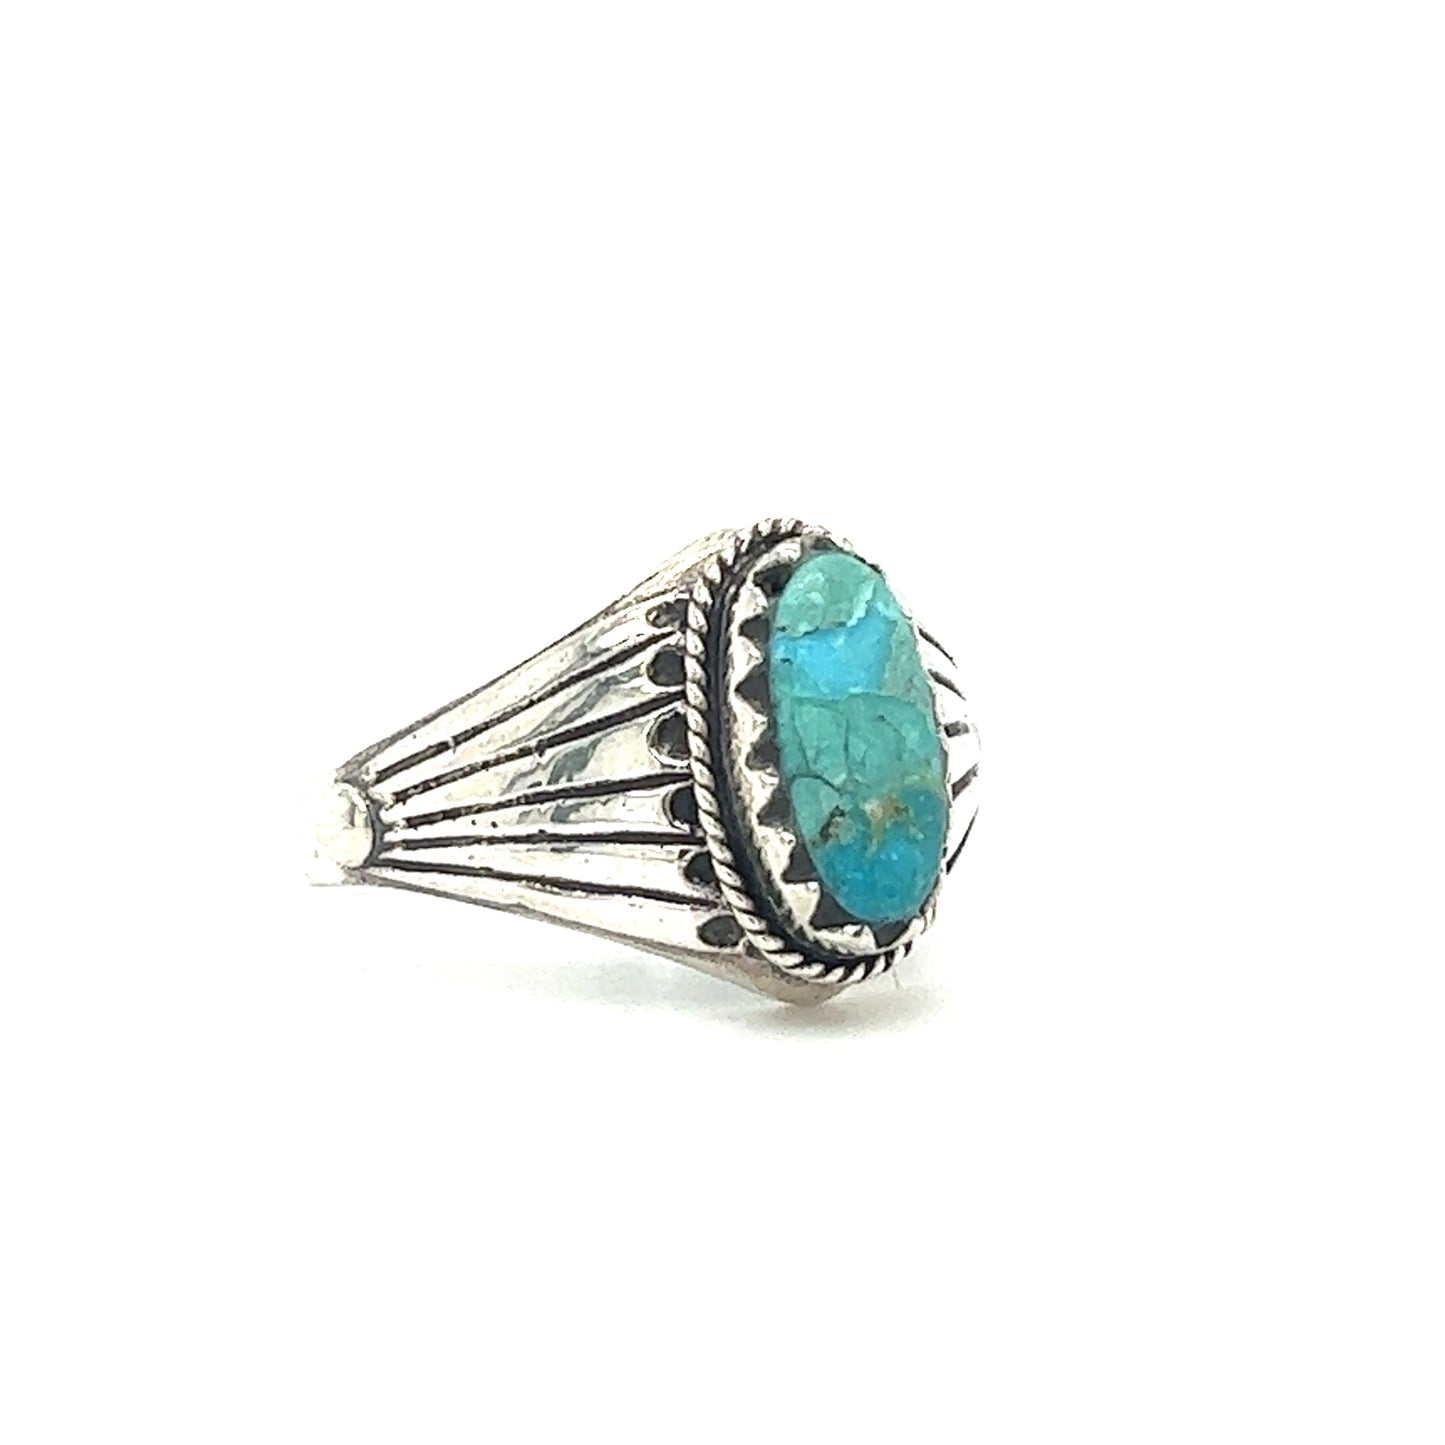 A minimalist silver ring with a Southwest Inspired Kingman Turquoise stone.